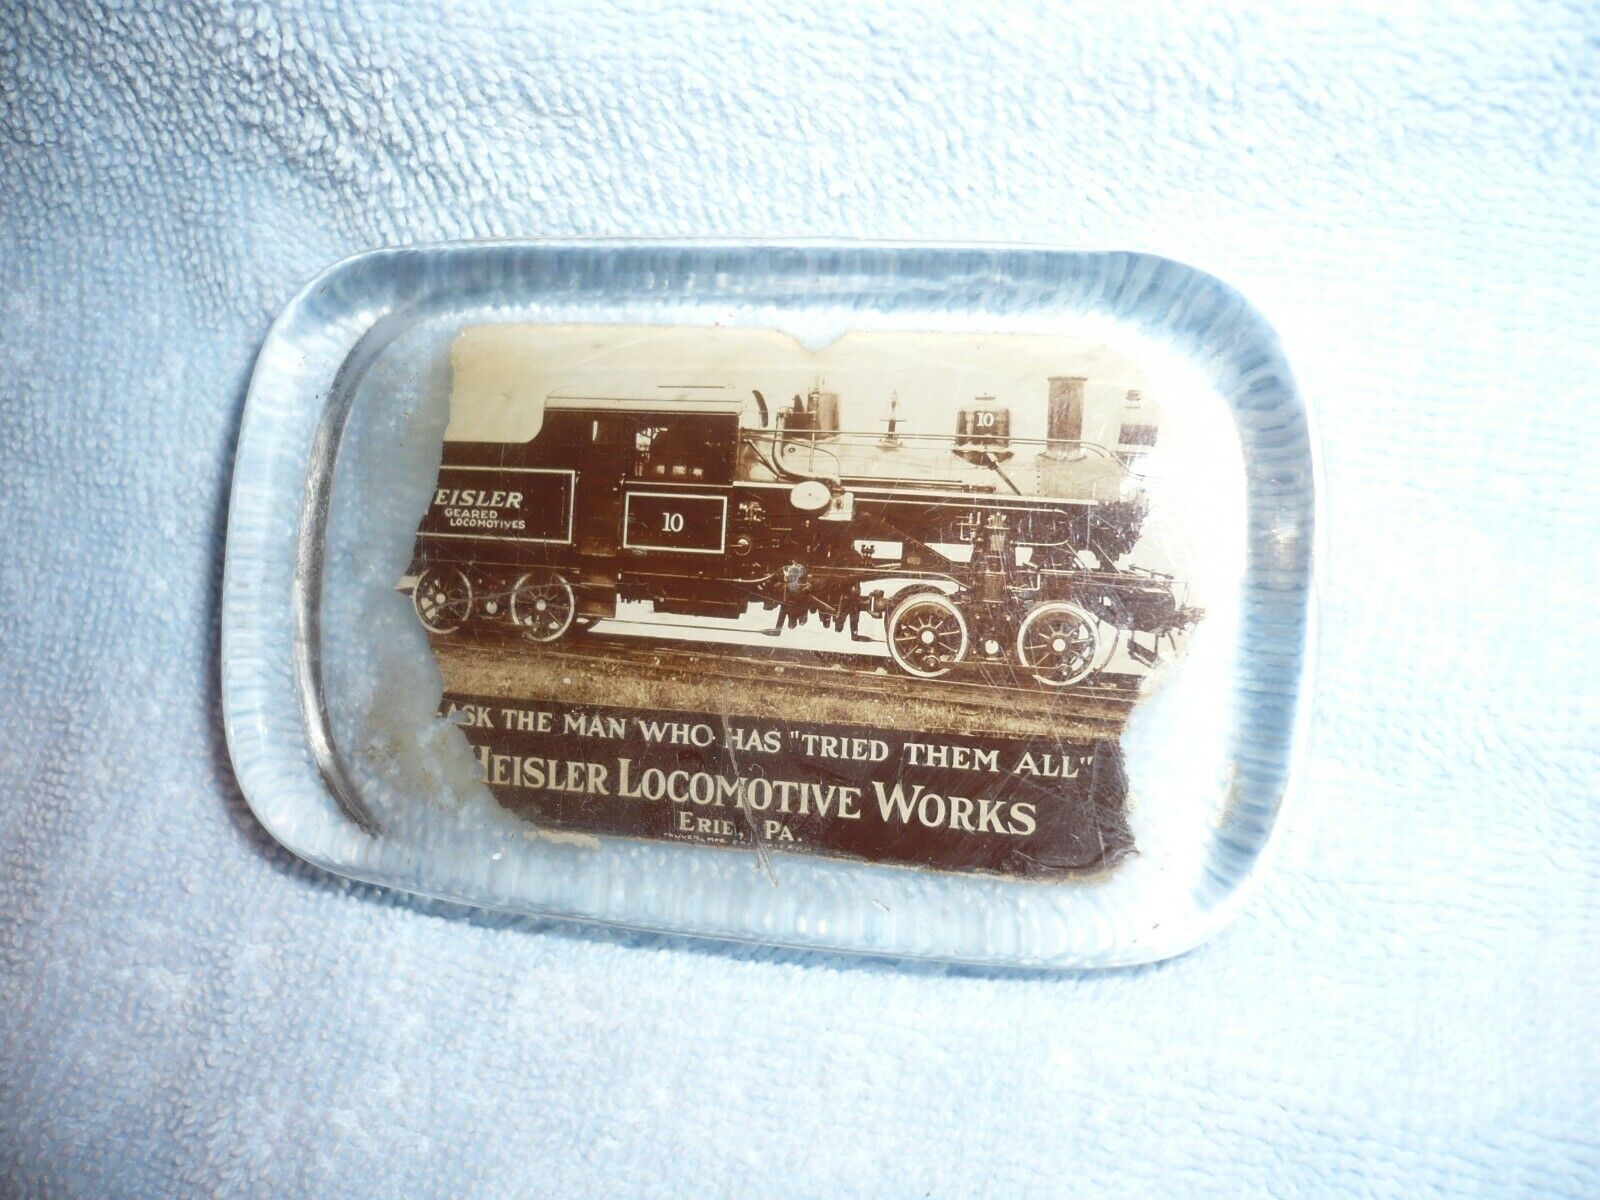  GREAT EARLY HEISLER LOCOMOTIVE WORKS ERIE PA glass advertising paperweight